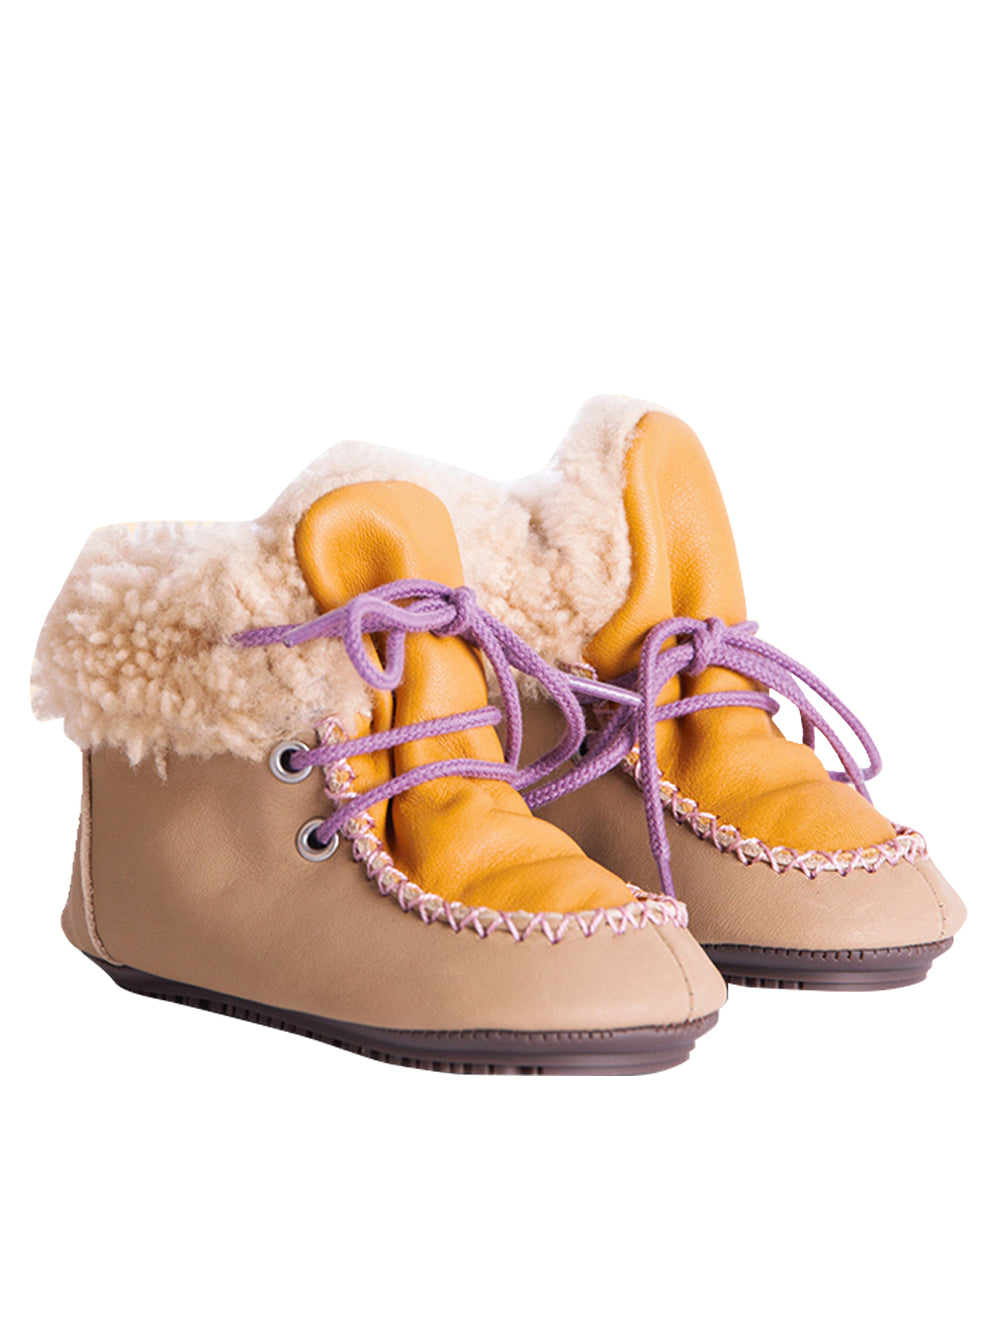 Lace Sheep Baby Boots